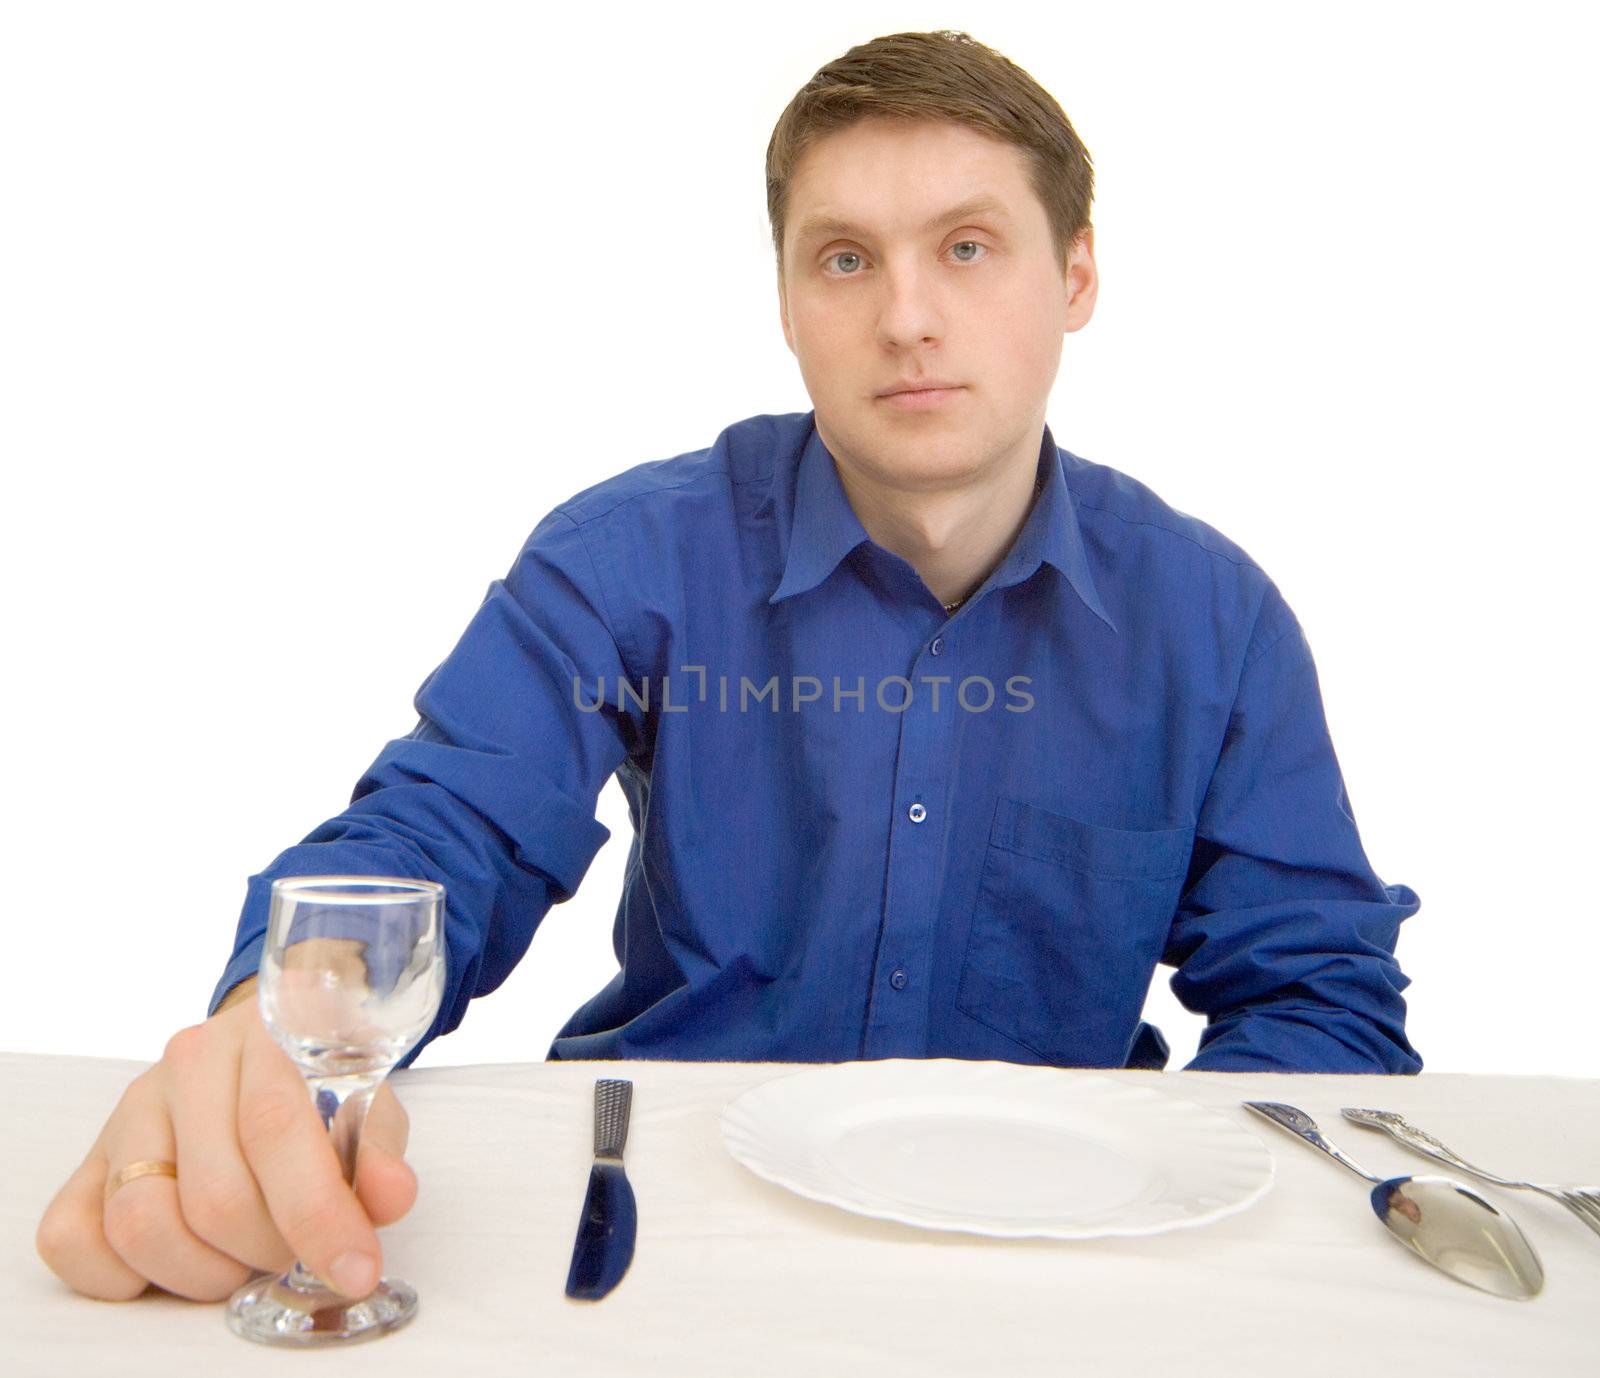 Guest of restaurant with glasses on a white background